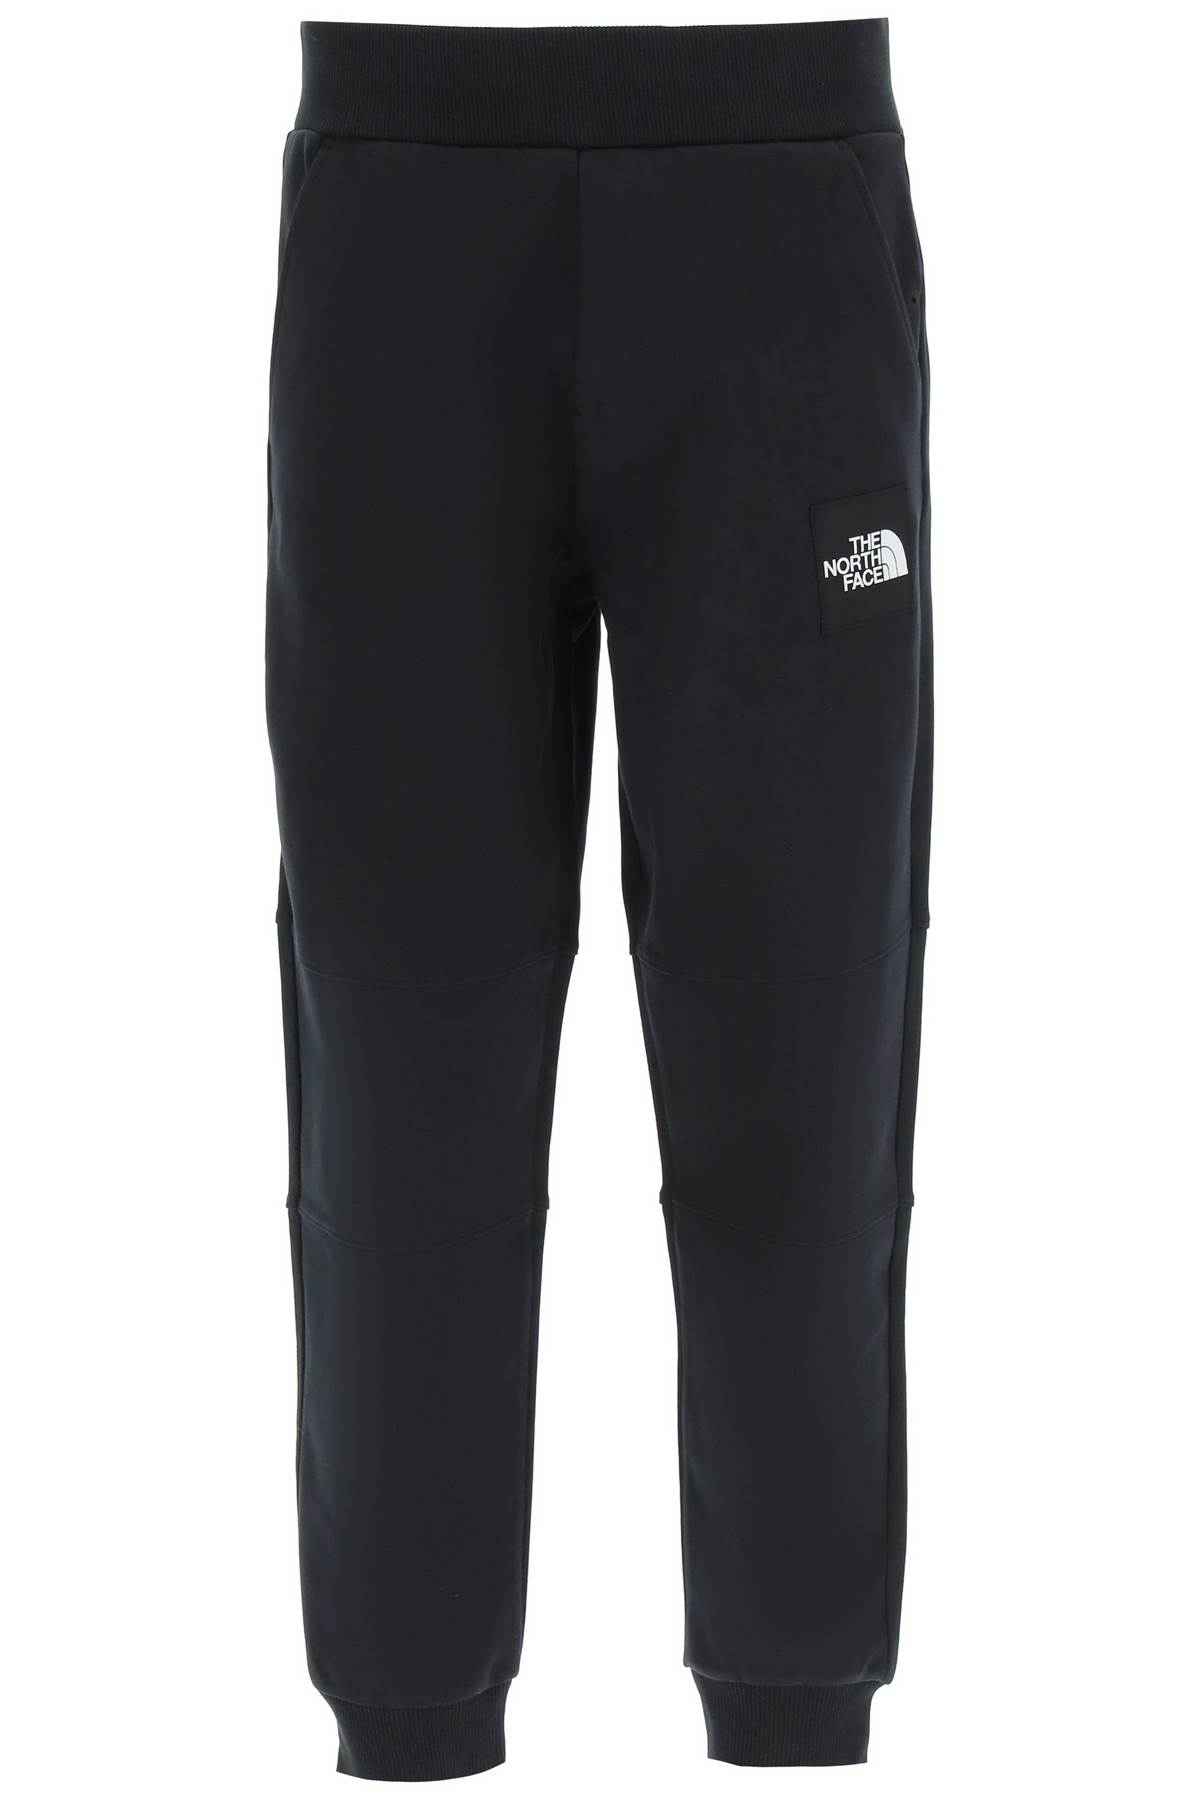 The North Face Fine Ii Jogger Pants